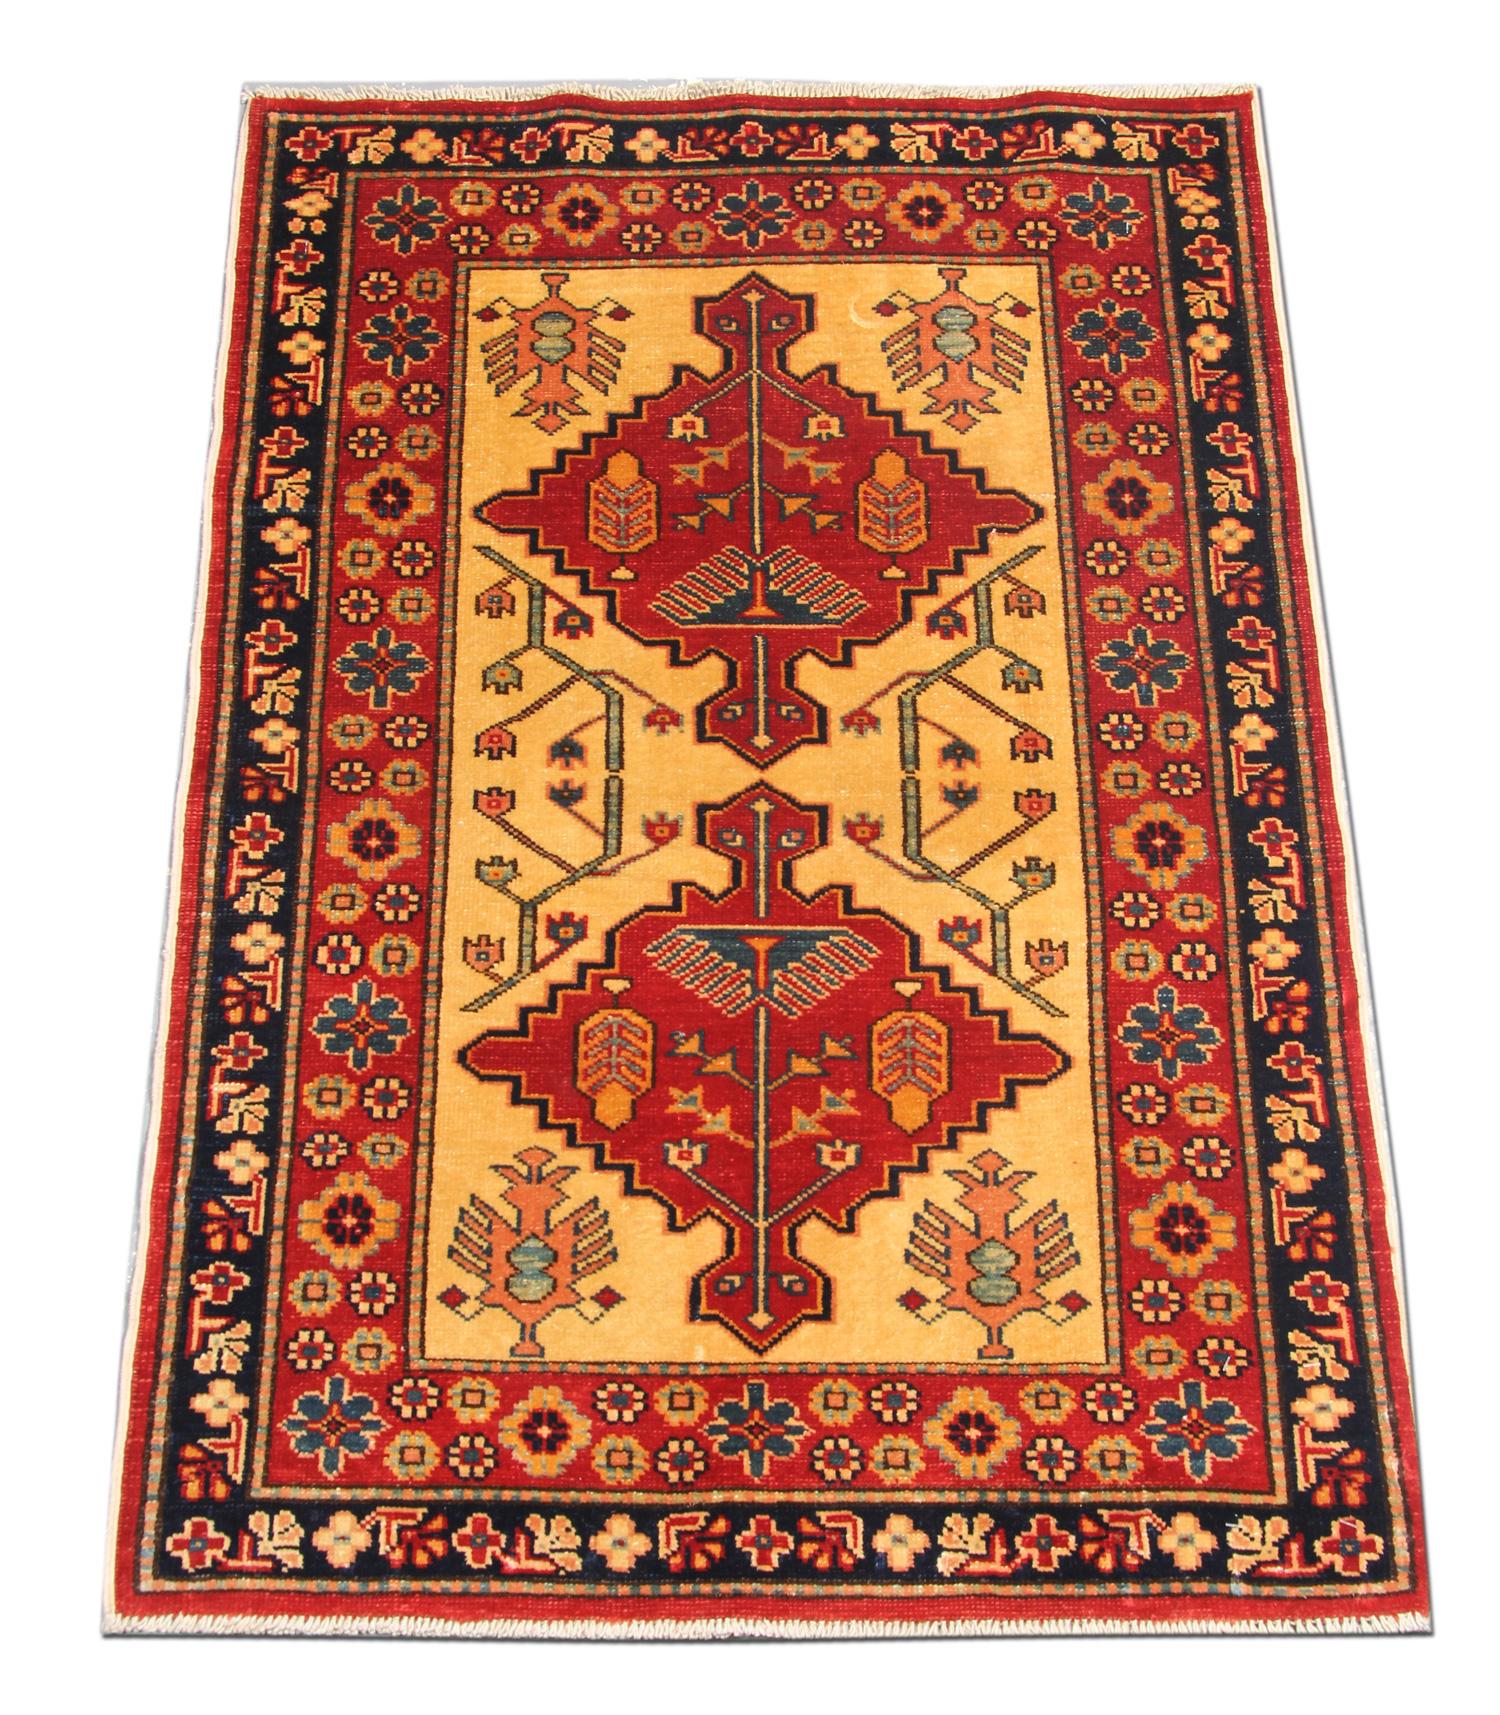 These small new traditional handmade rugs feature designs from the Kazak region. A conventional tribal rug is famous in the part of Kazak Area. Afghan weavers have made this handwoven rug of top-quality wool and cotton. This carpet rug features